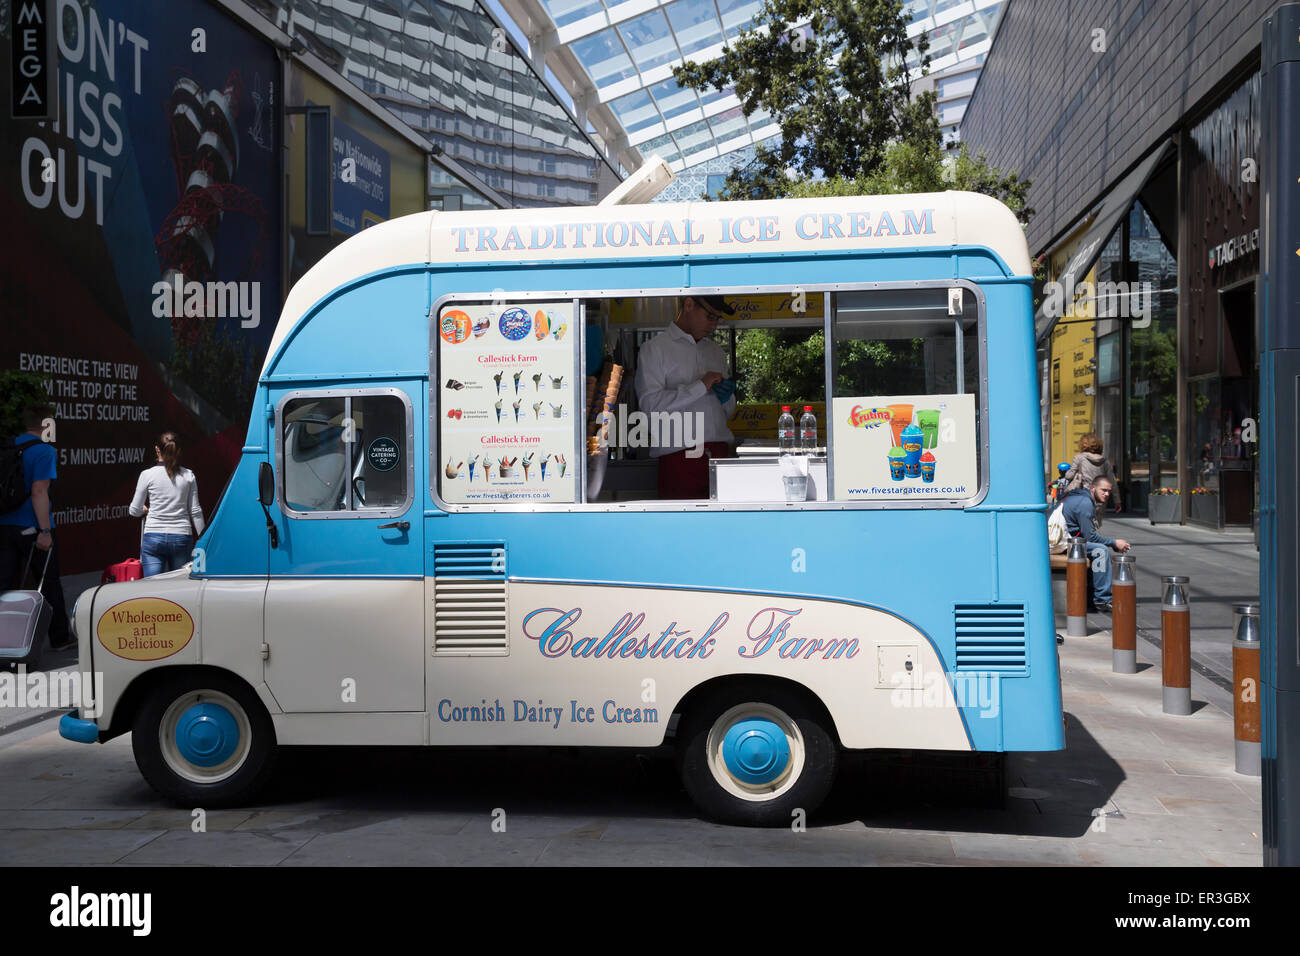 Traditional ice cream van parked in Westfield shopping centre Stratford  Stock Photo - Alamy